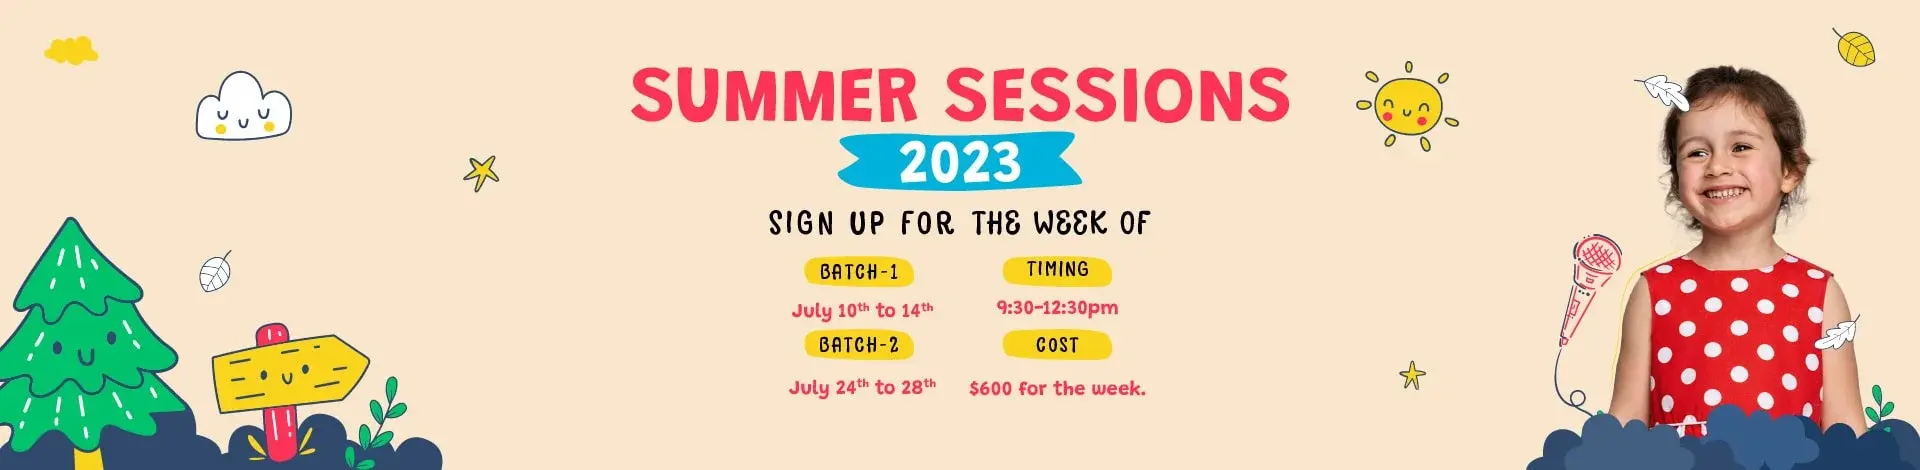 summer session without offer